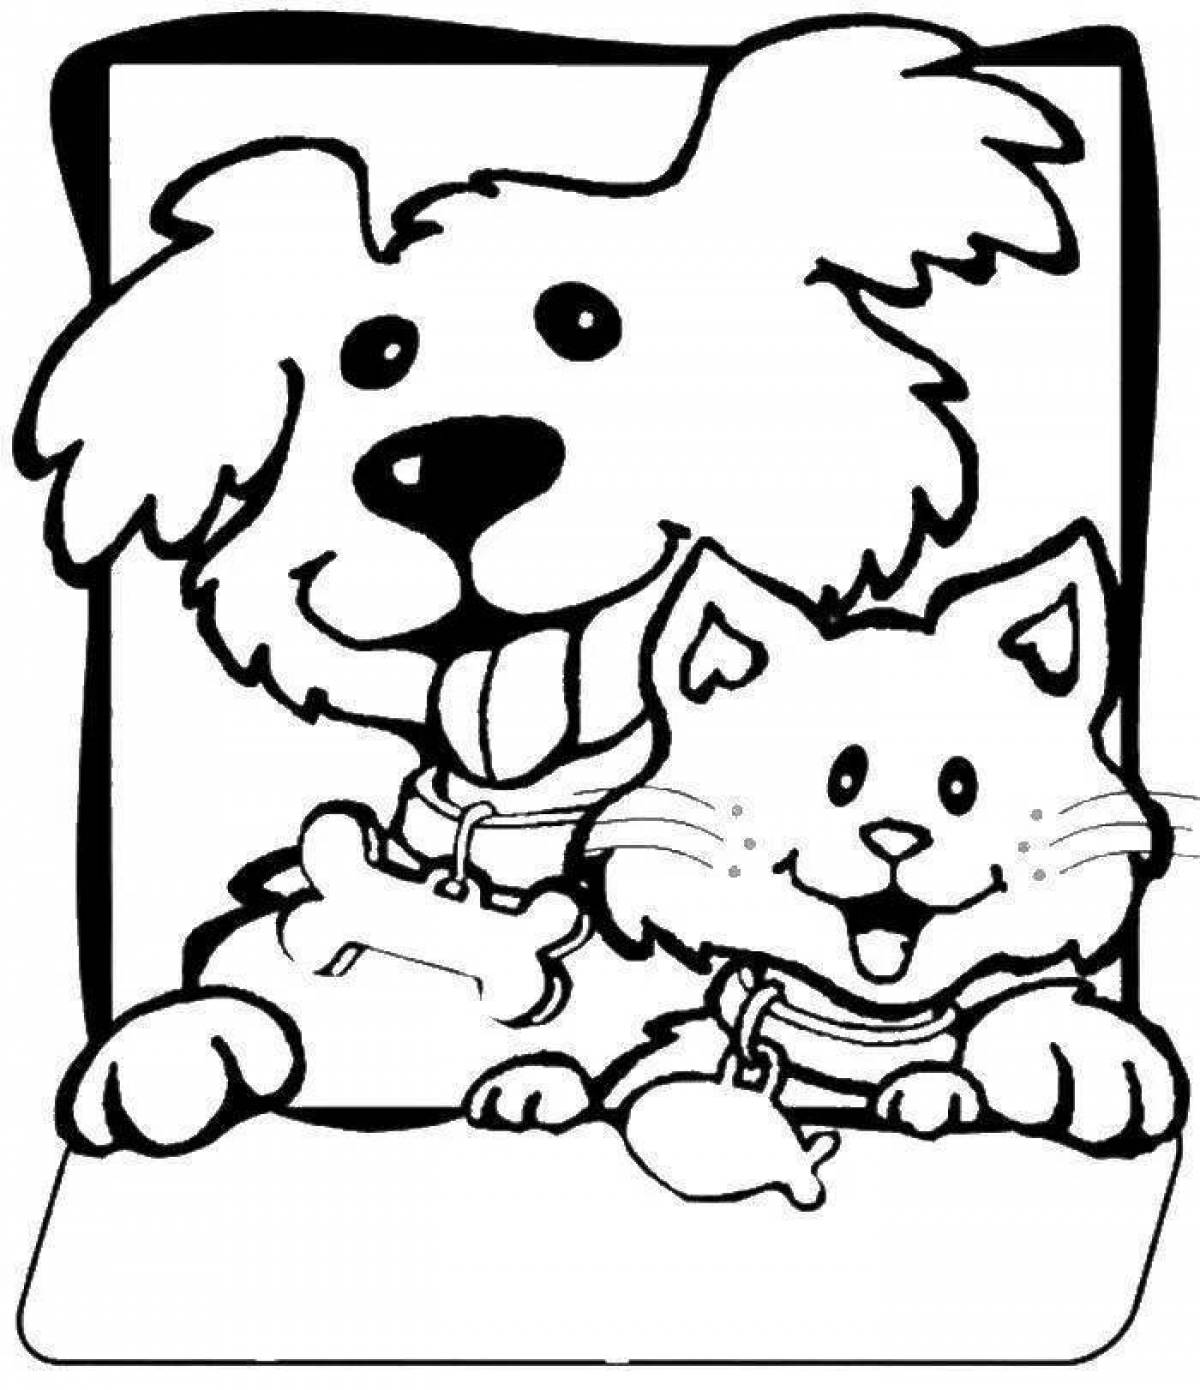 Dog and cat #1